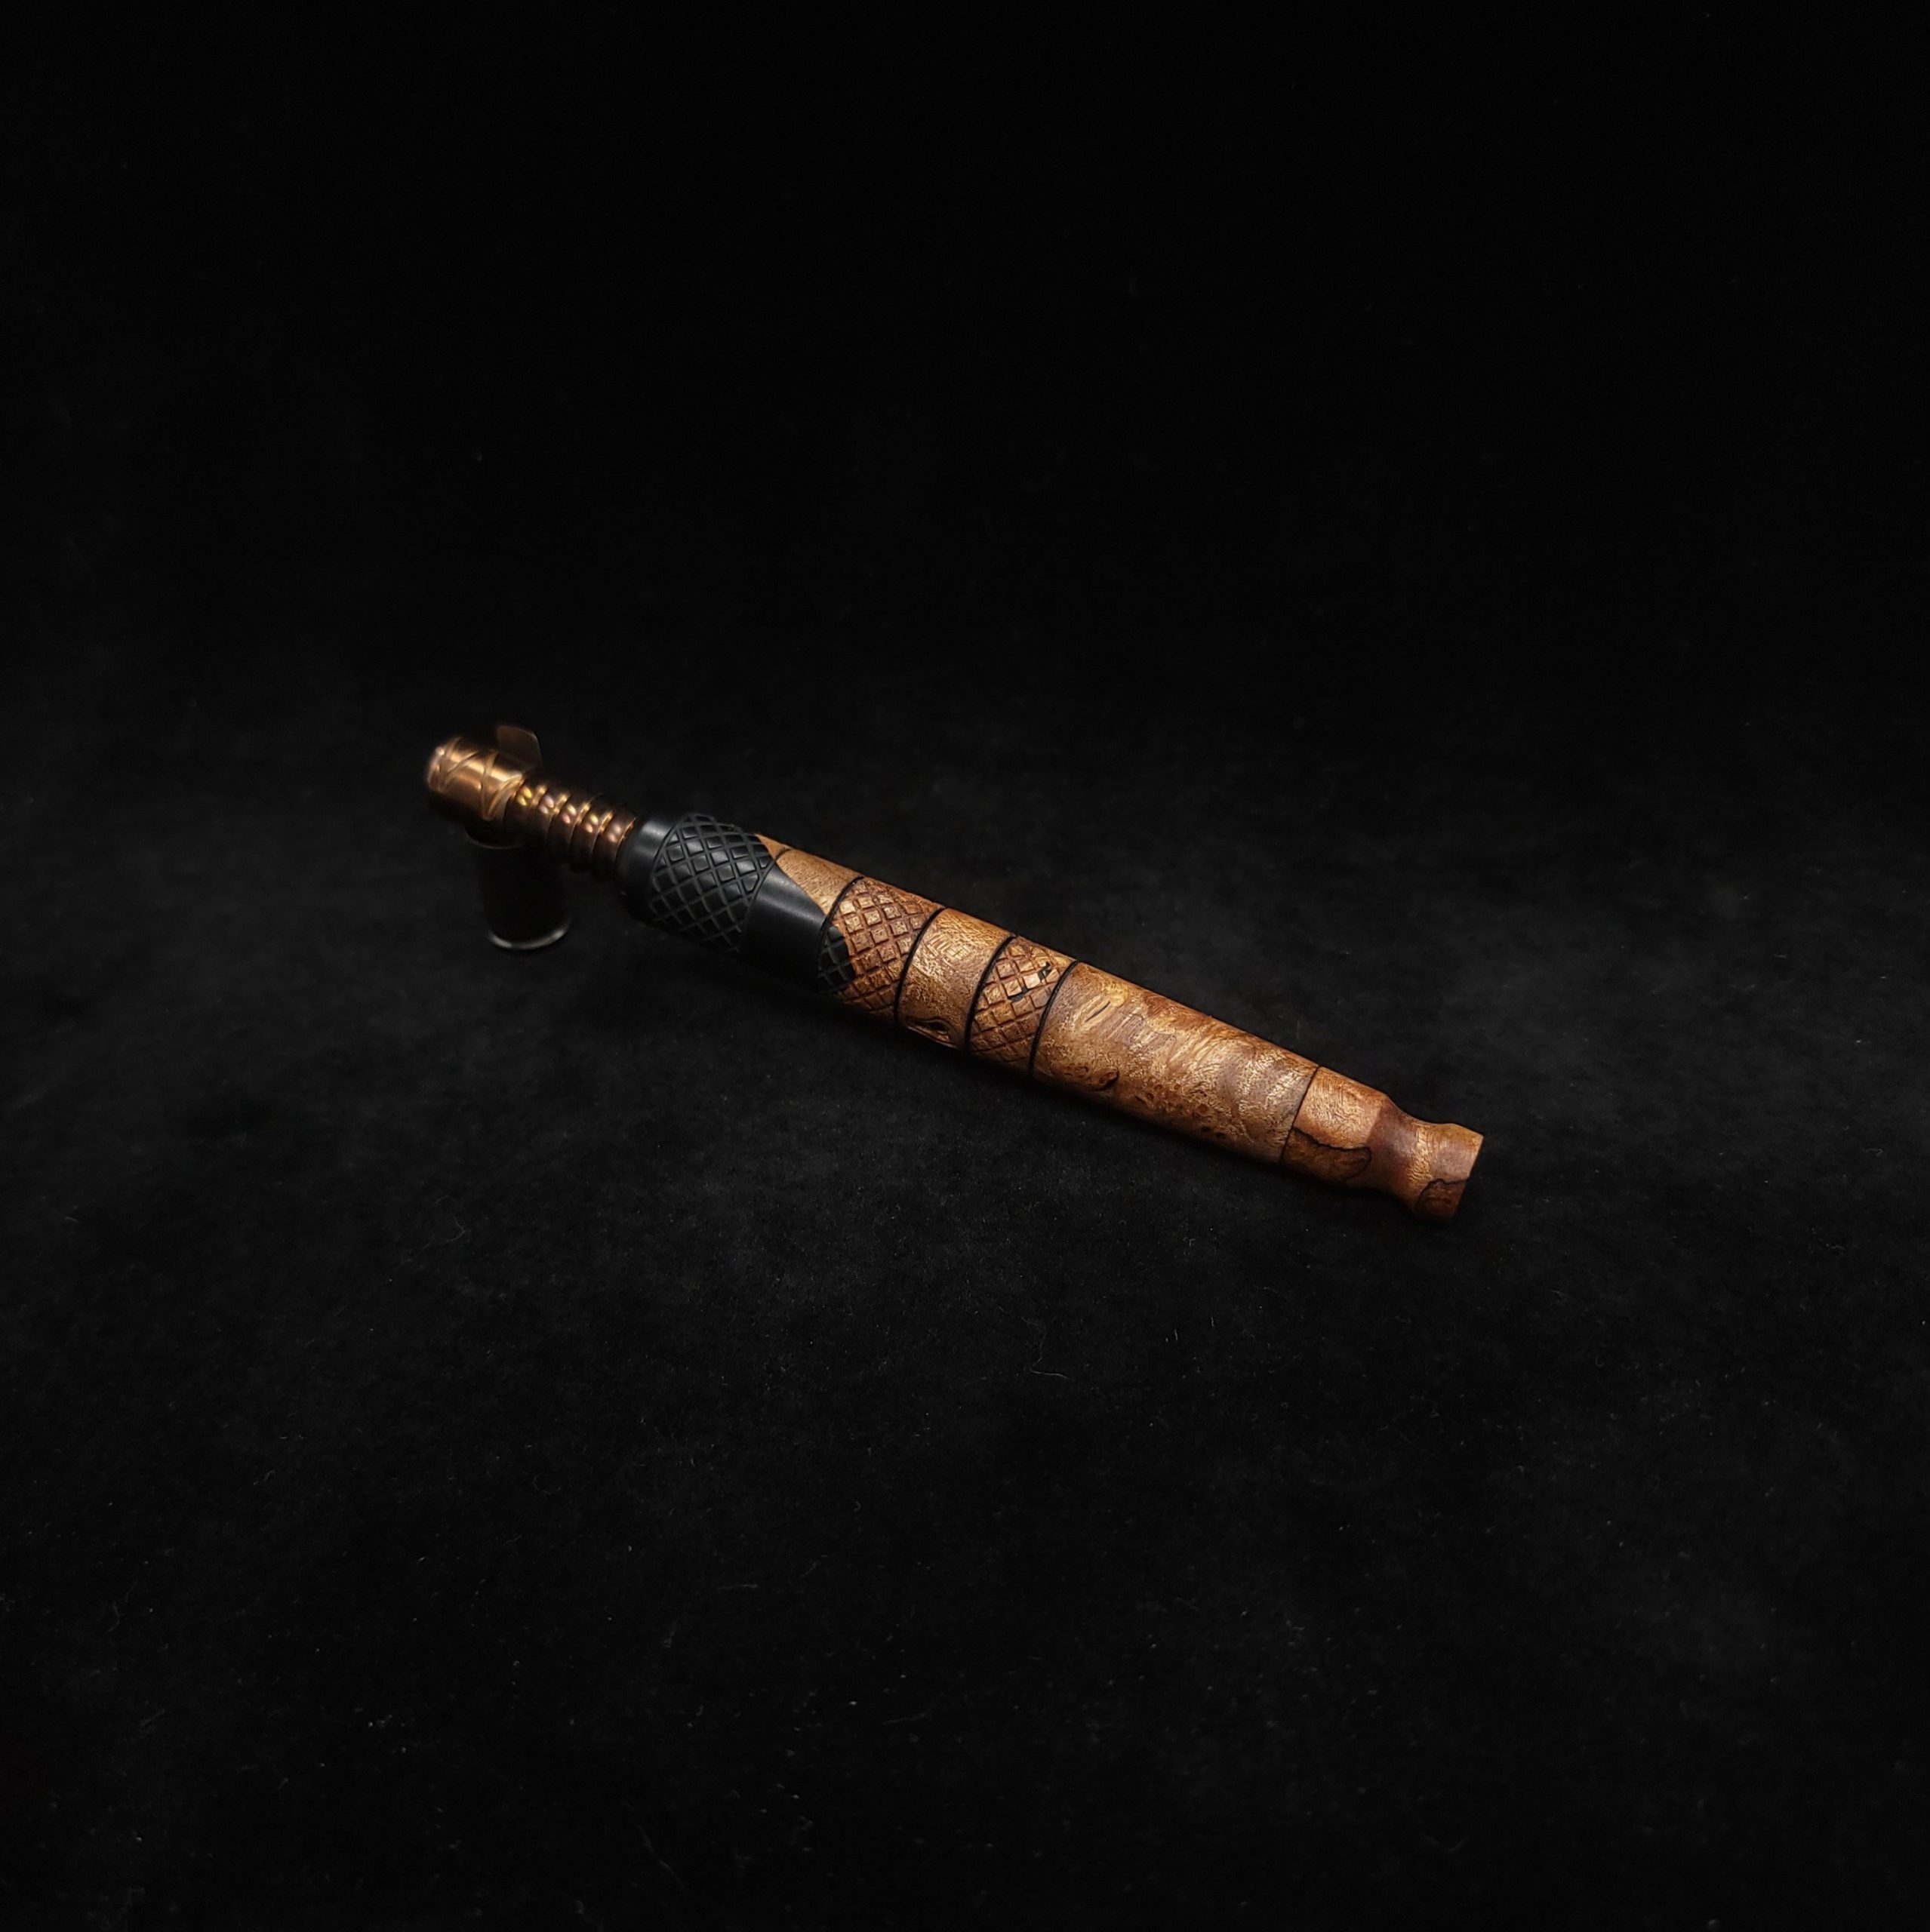 This image portrays High Class-Knurled XL Dynavap Stem/Matte Black Burl Hybrid + Matching Mouthpiece by Dovetail Woodwork.